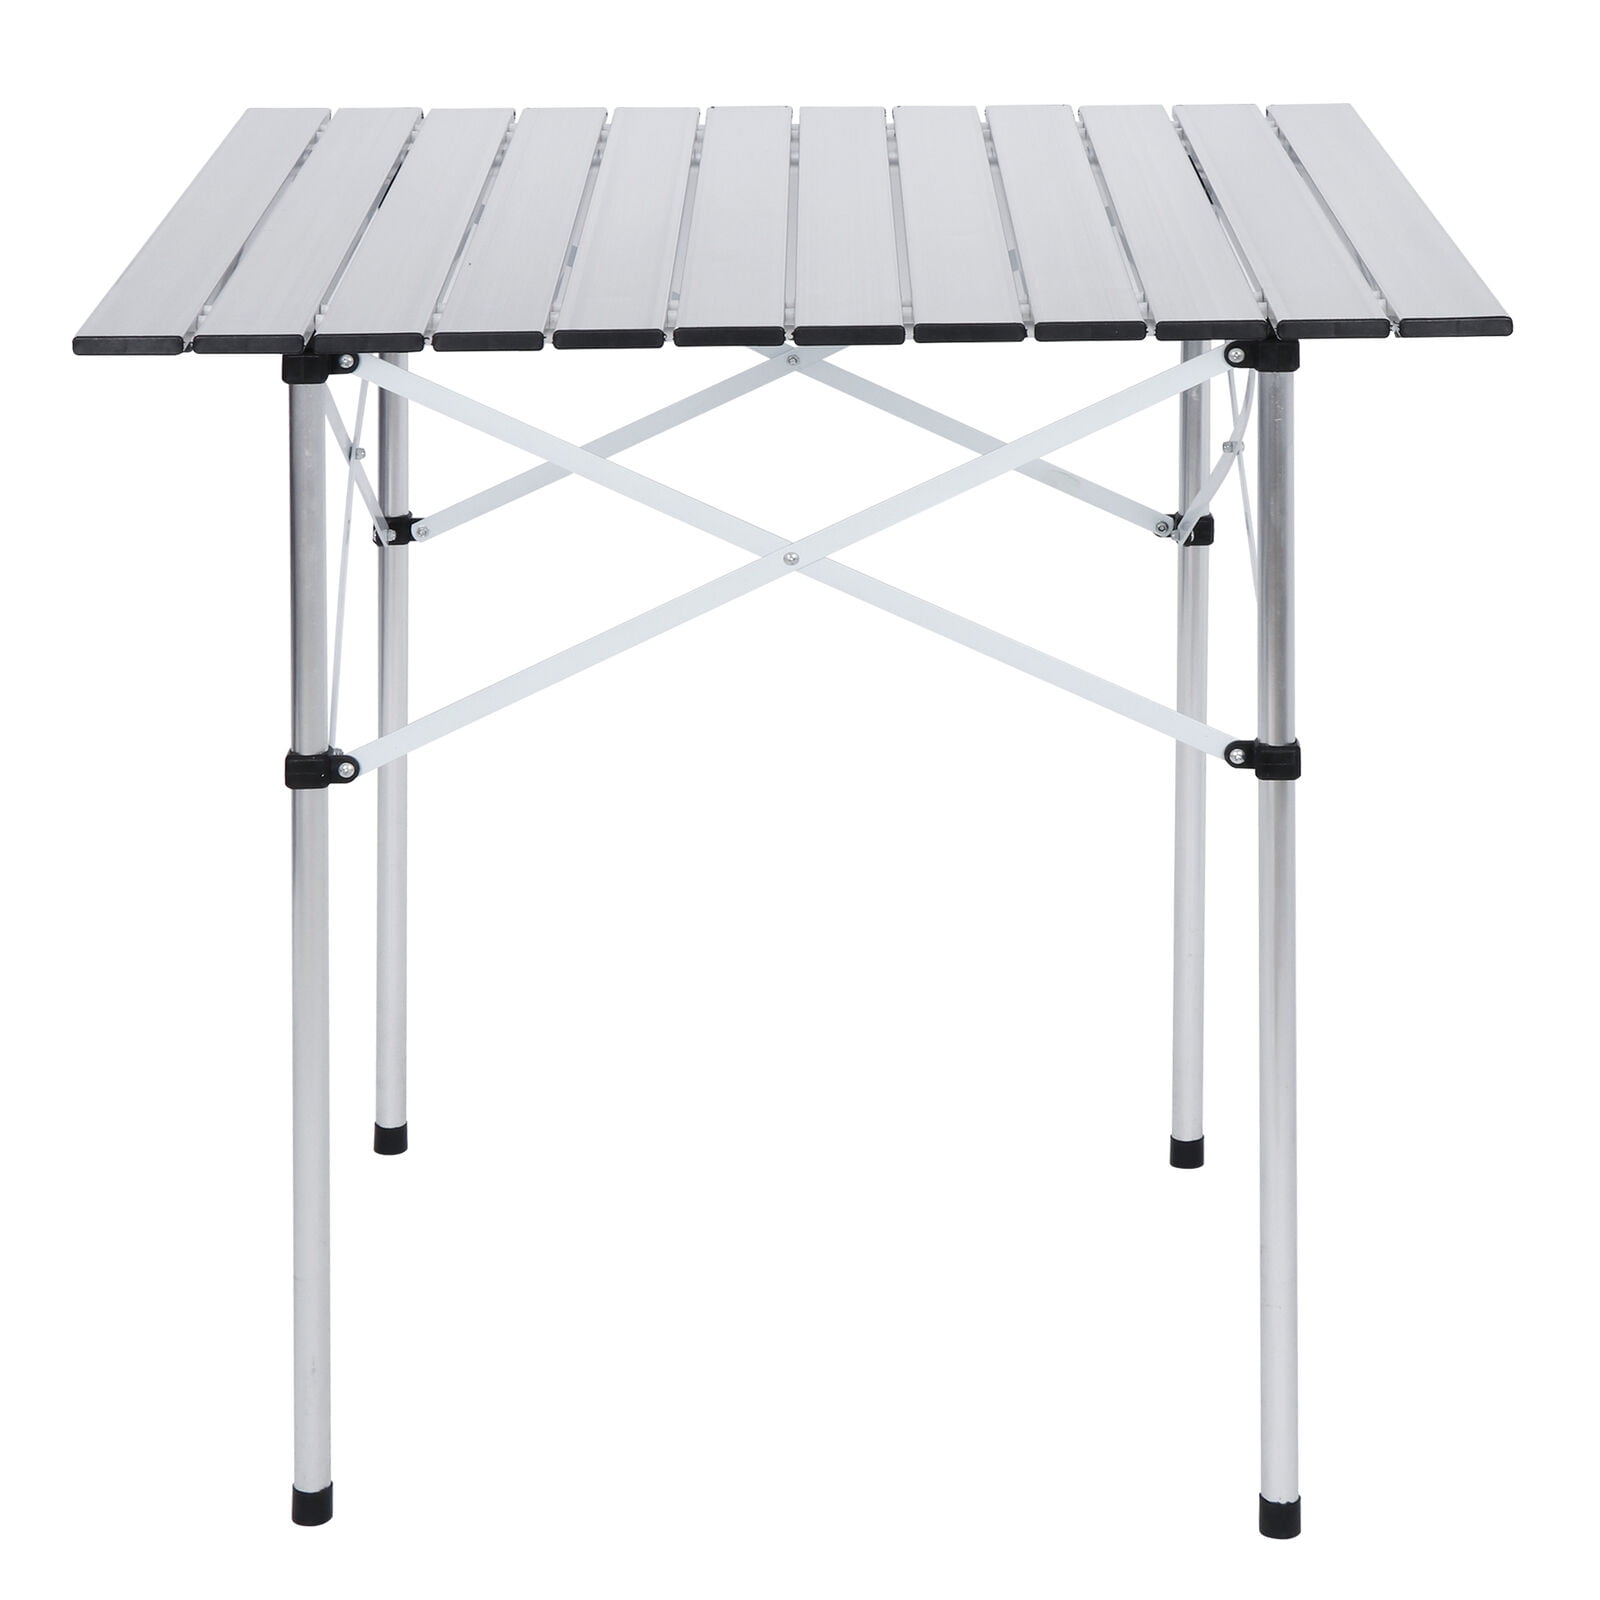 Brown Table in a Bag TA2727 Tall Aluminum Portable Table with Carrying Bag, 